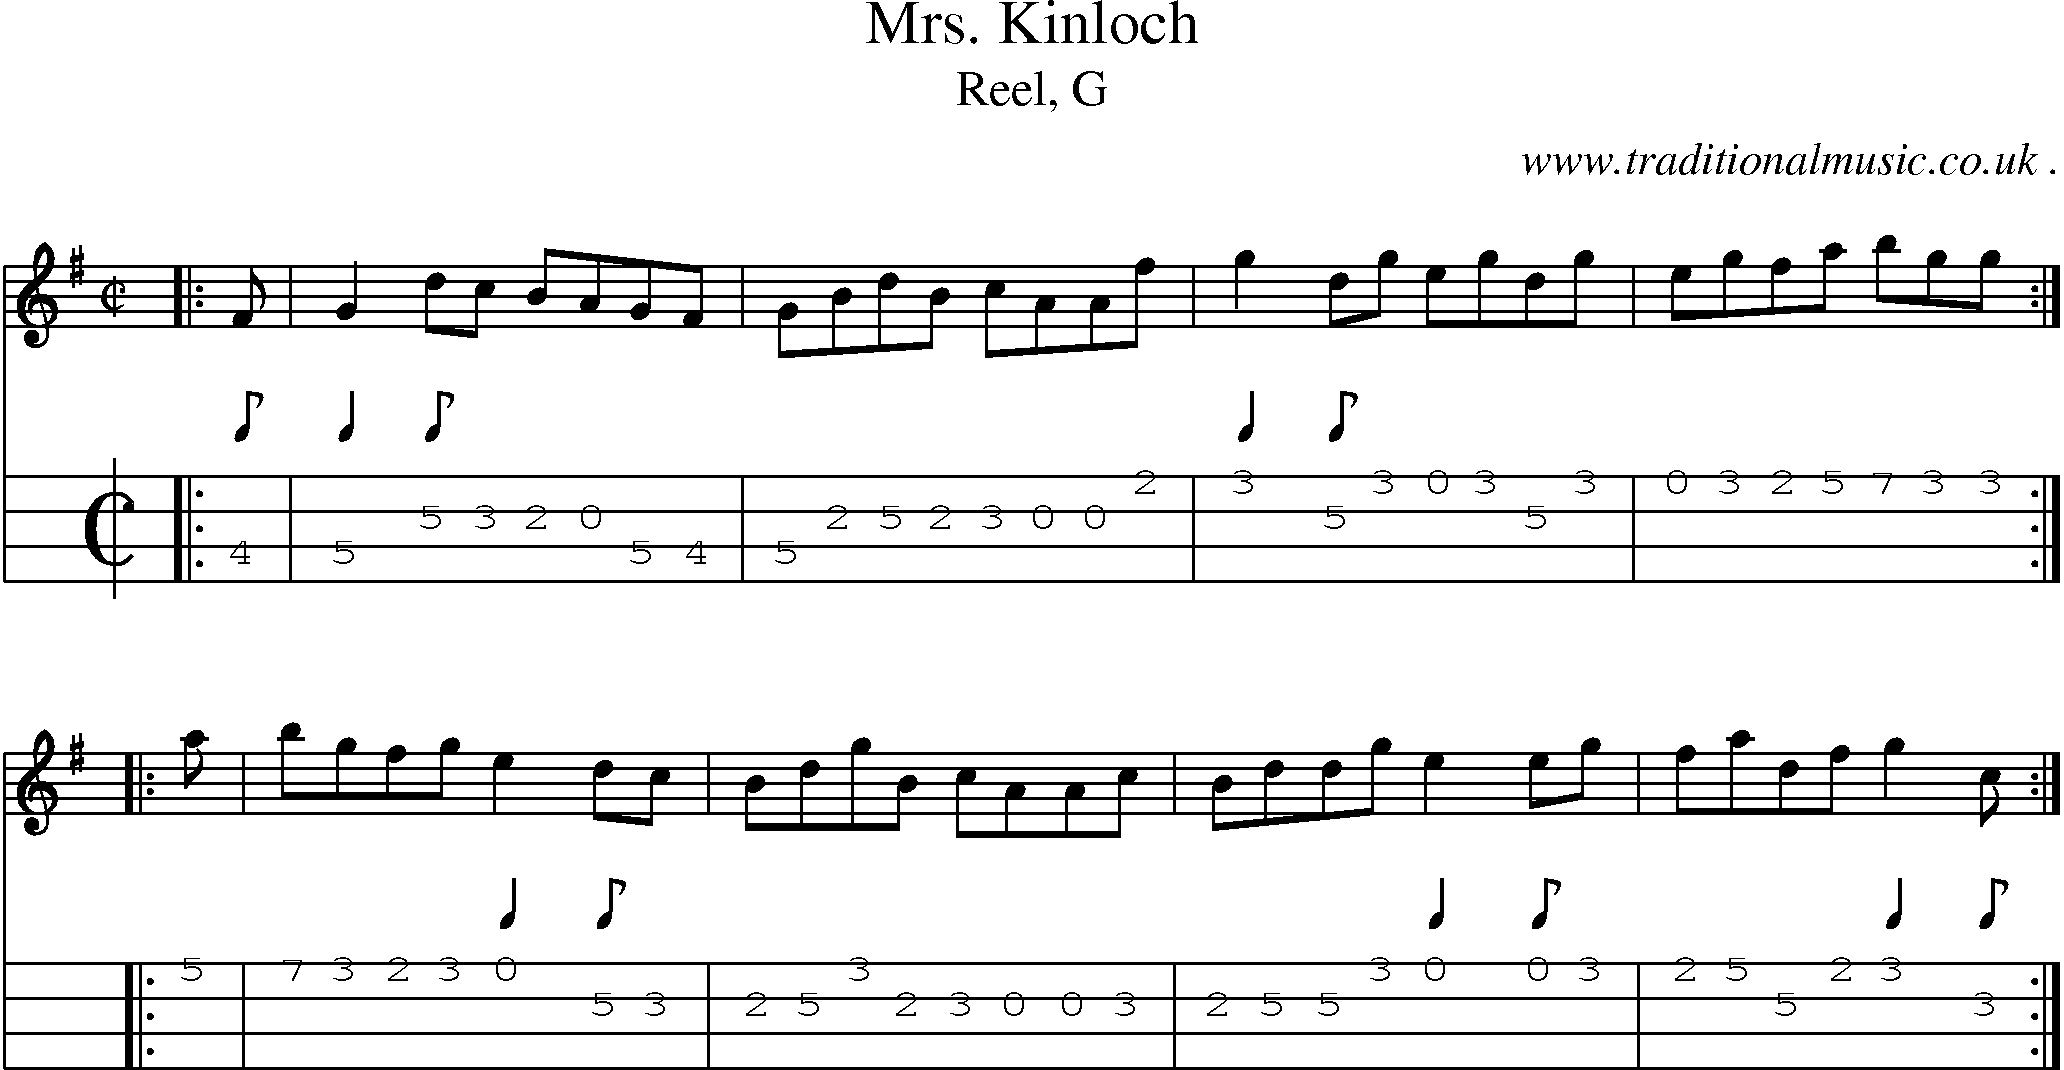 Sheet-music  score, Chords and Mandolin Tabs for Mrs Kinloch